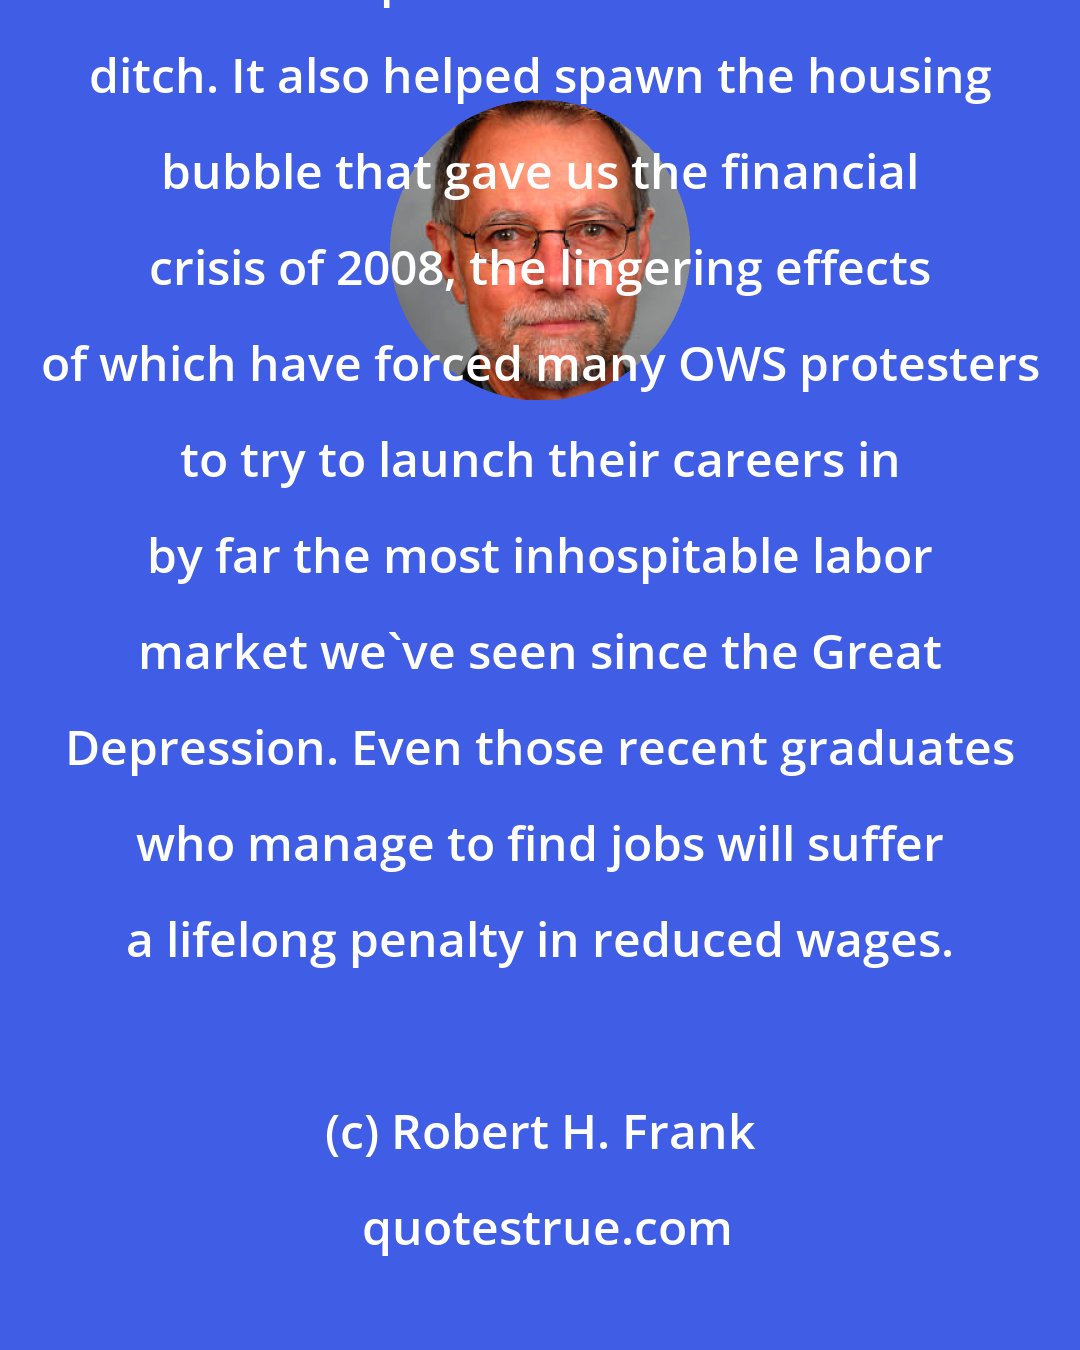 Robert H. Frank: It is no exaggeration to say that rising inequality has driven many of the 99 percent into a financial ditch. It also helped spawn the housing bubble that gave us the financial crisis of 2008, the lingering effects of which have forced many OWS protesters to try to launch their careers in by far the most inhospitable labor market we've seen since the Great Depression. Even those recent graduates who manage to find jobs will suffer a lifelong penalty in reduced wages.